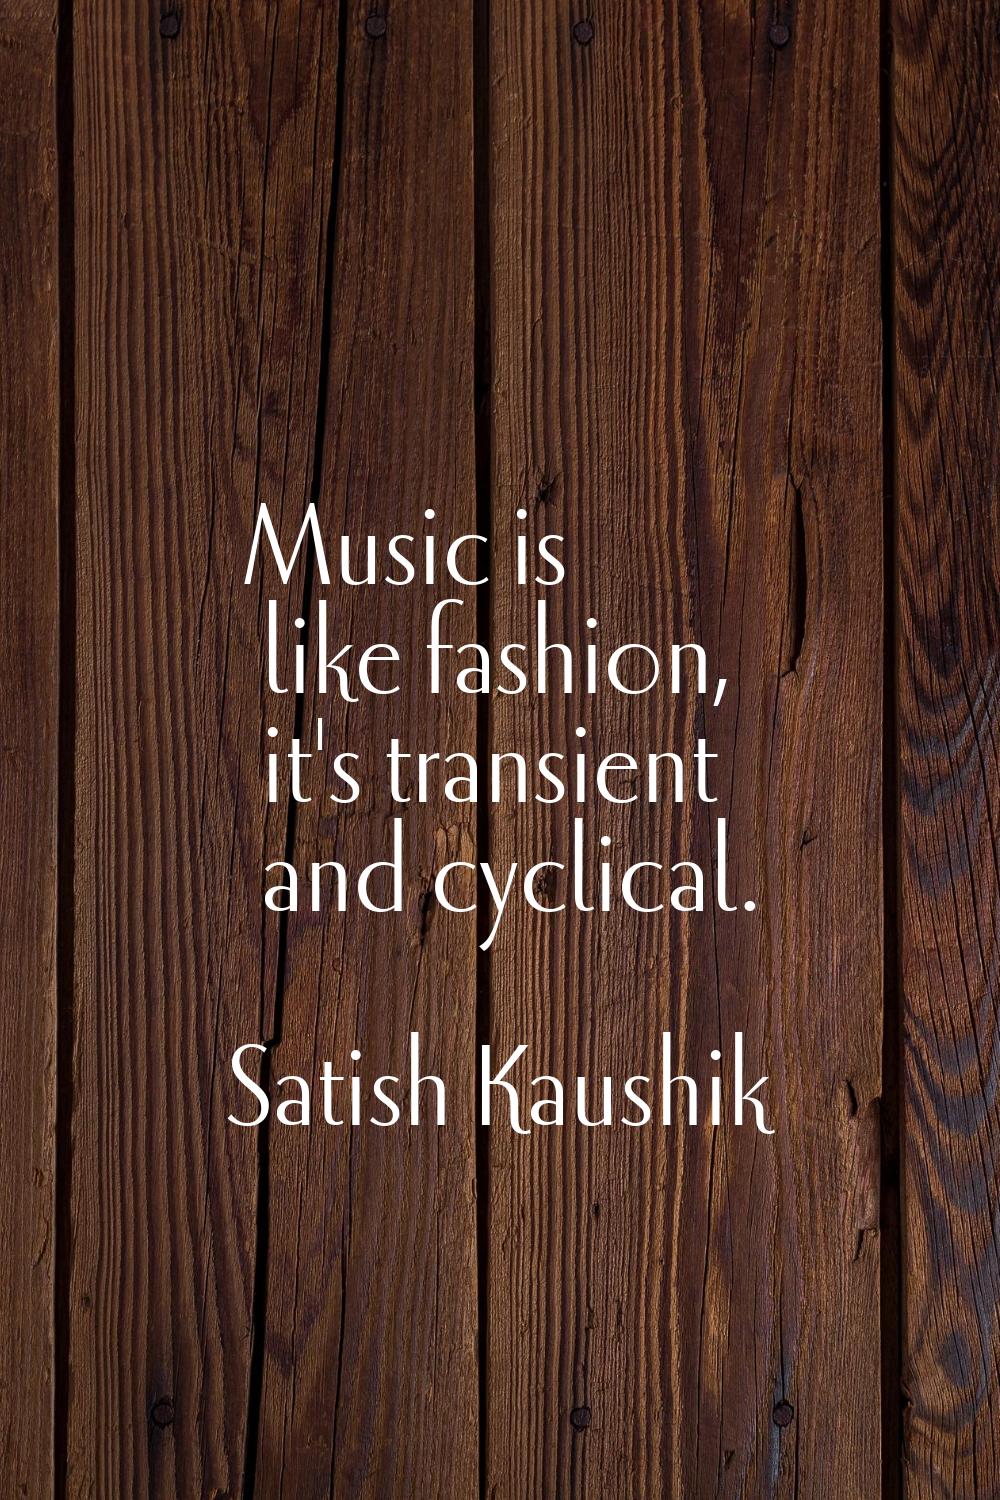 Music is like fashion, it's transient and cyclical.